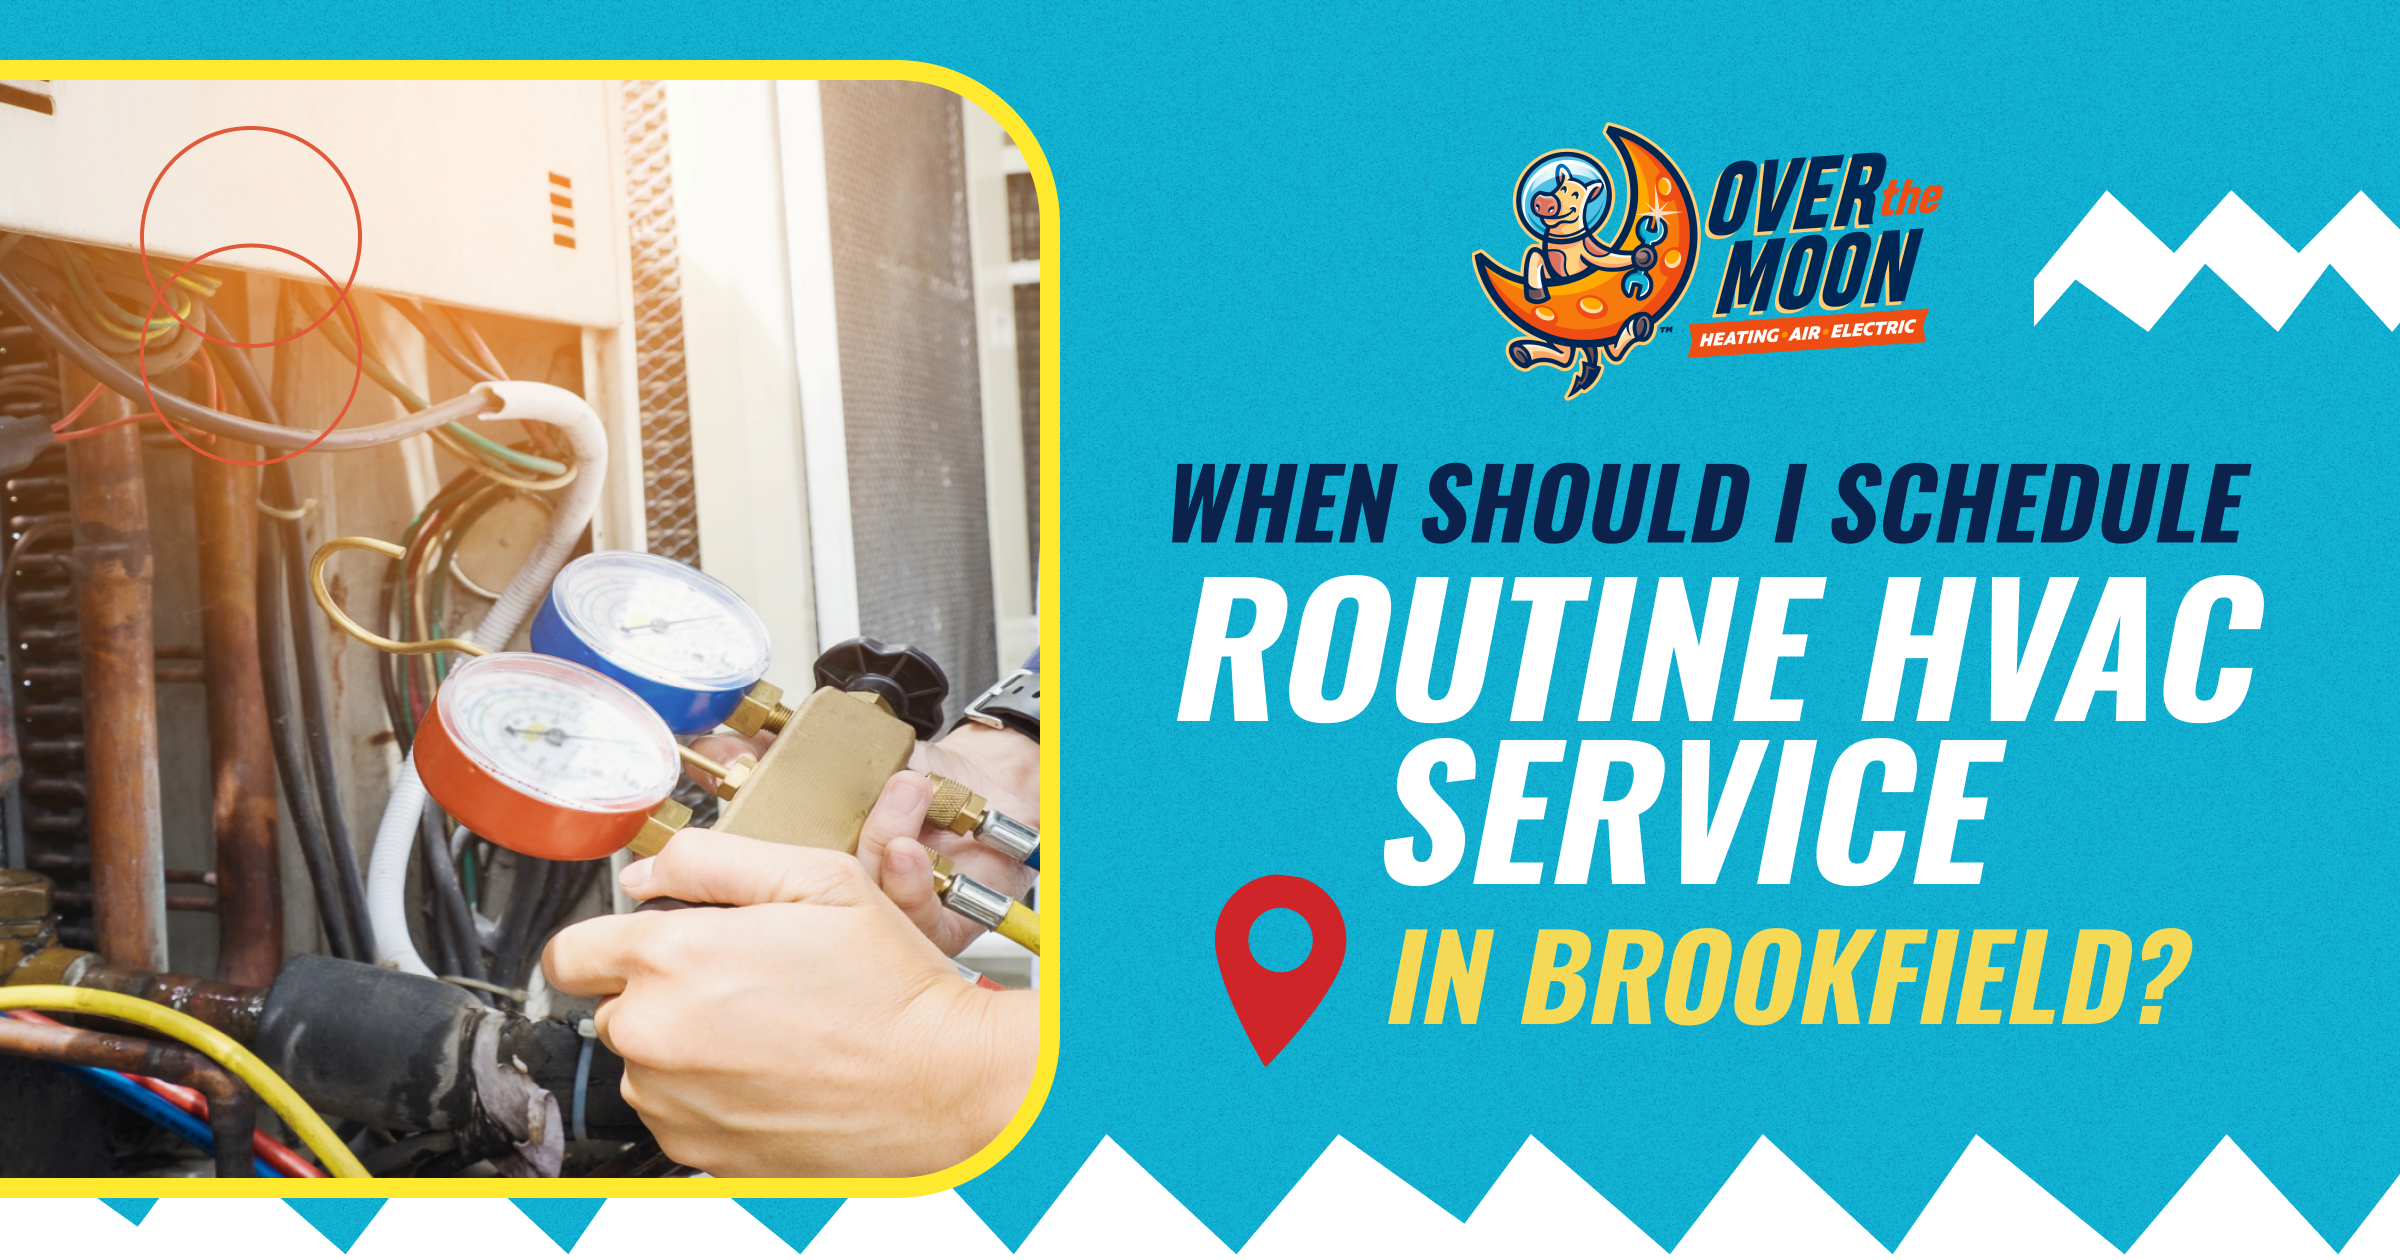 Over The Moon When Should I Schedule Routine Hvac Service In Brookfield (1)